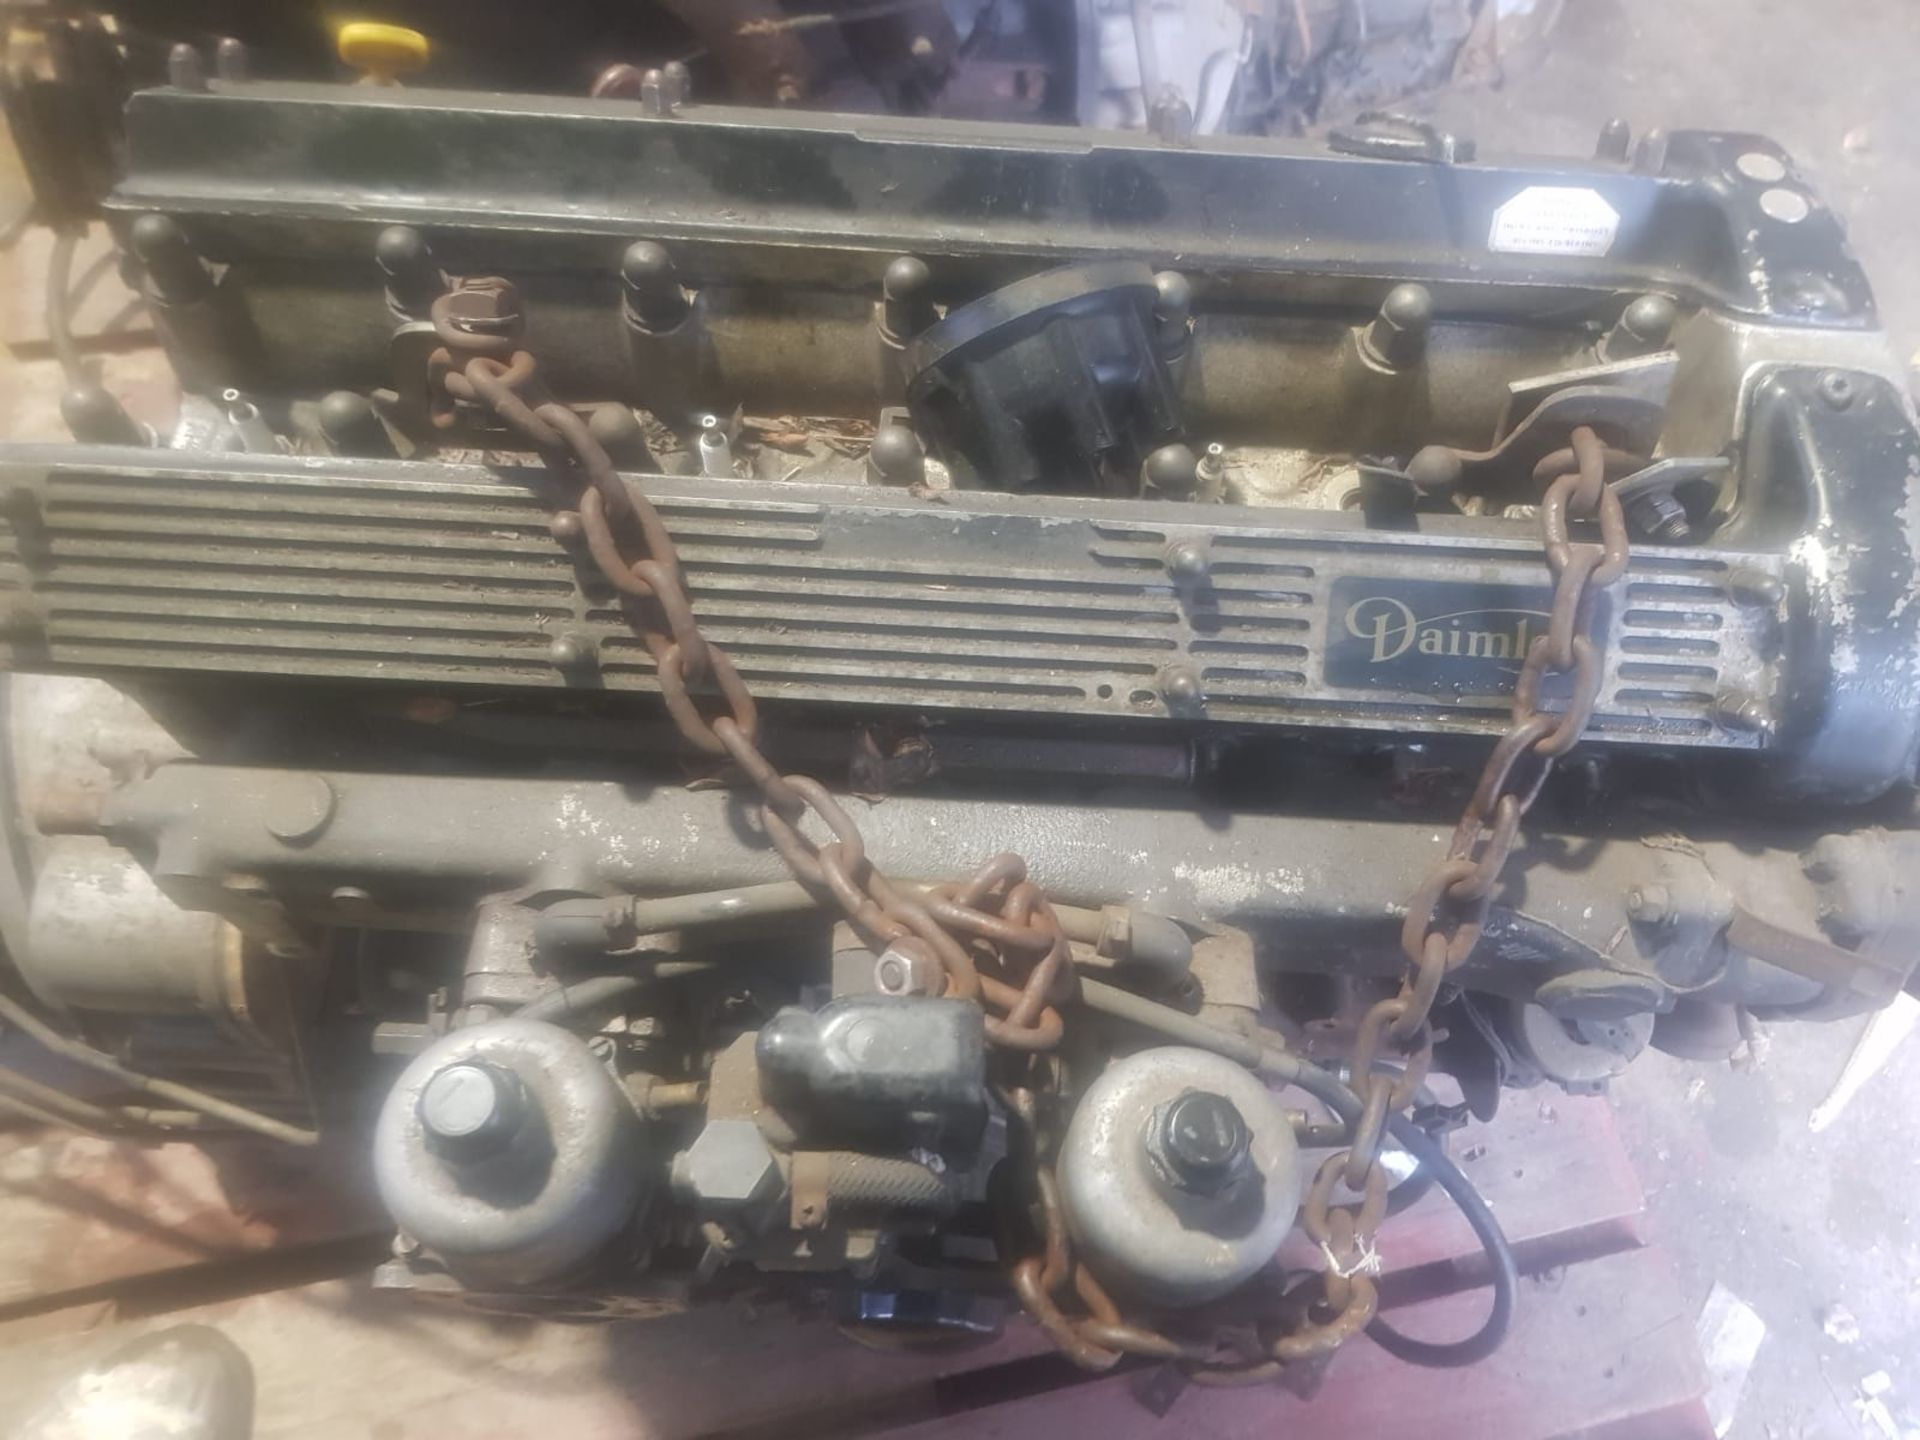 OLD DAIMLER 4.2 ENGINE AND GEAR BOX NO VAT ON ITEM